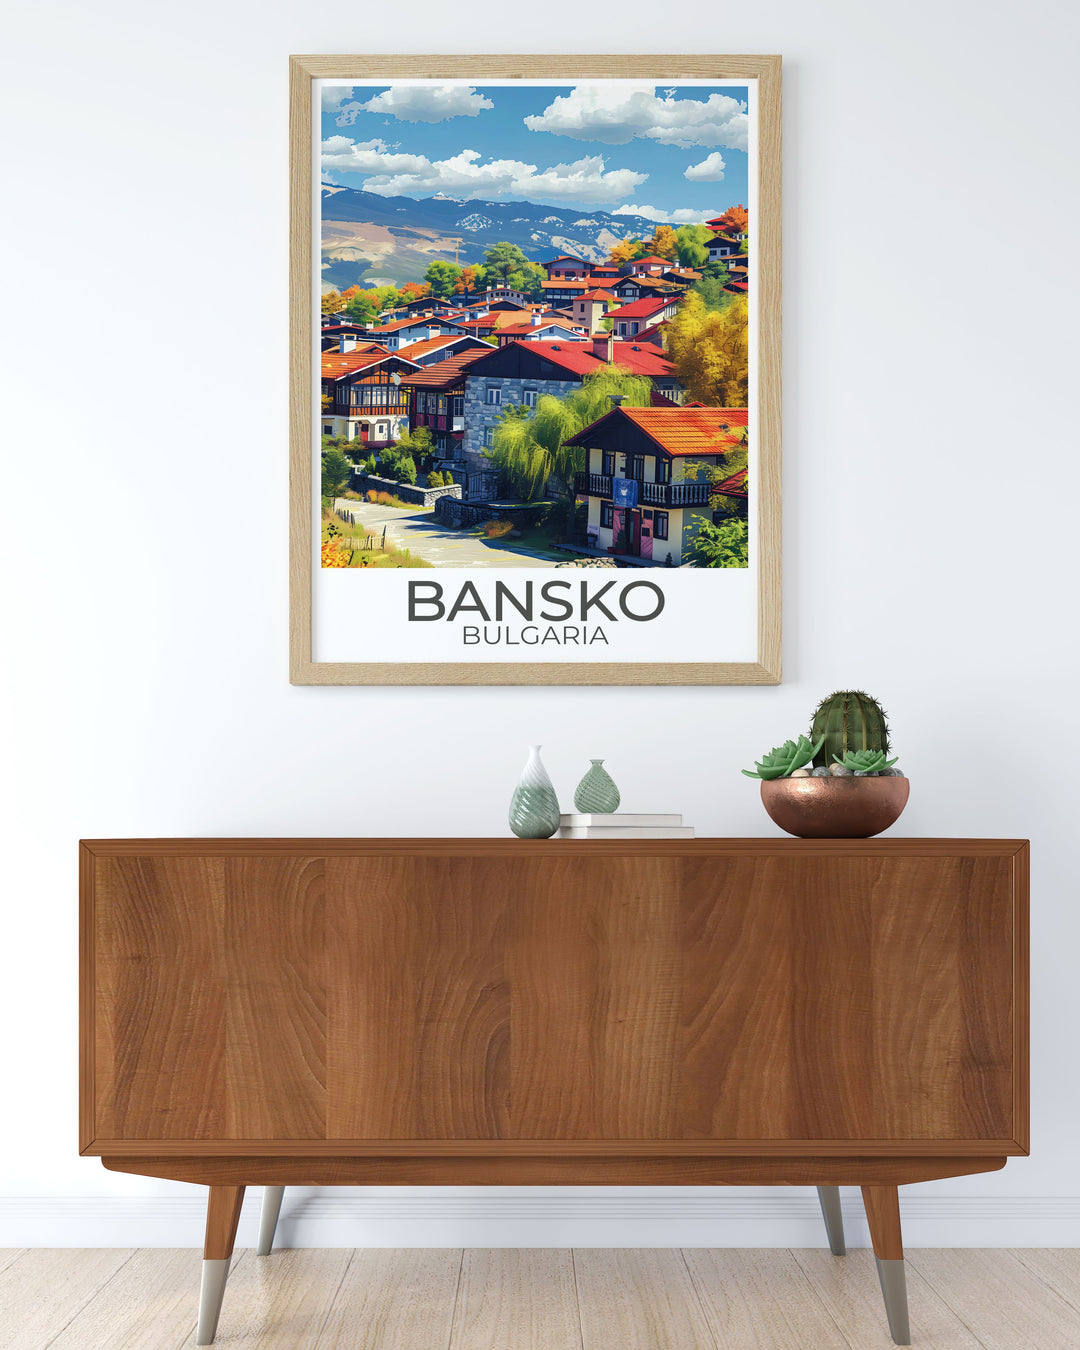 The vibrant ski slopes of Bansko, with their excellent snow conditions and diverse terrain, are depicted in this detailed illustration, offering a glimpse into one of Bulgarias premier winter destinations.